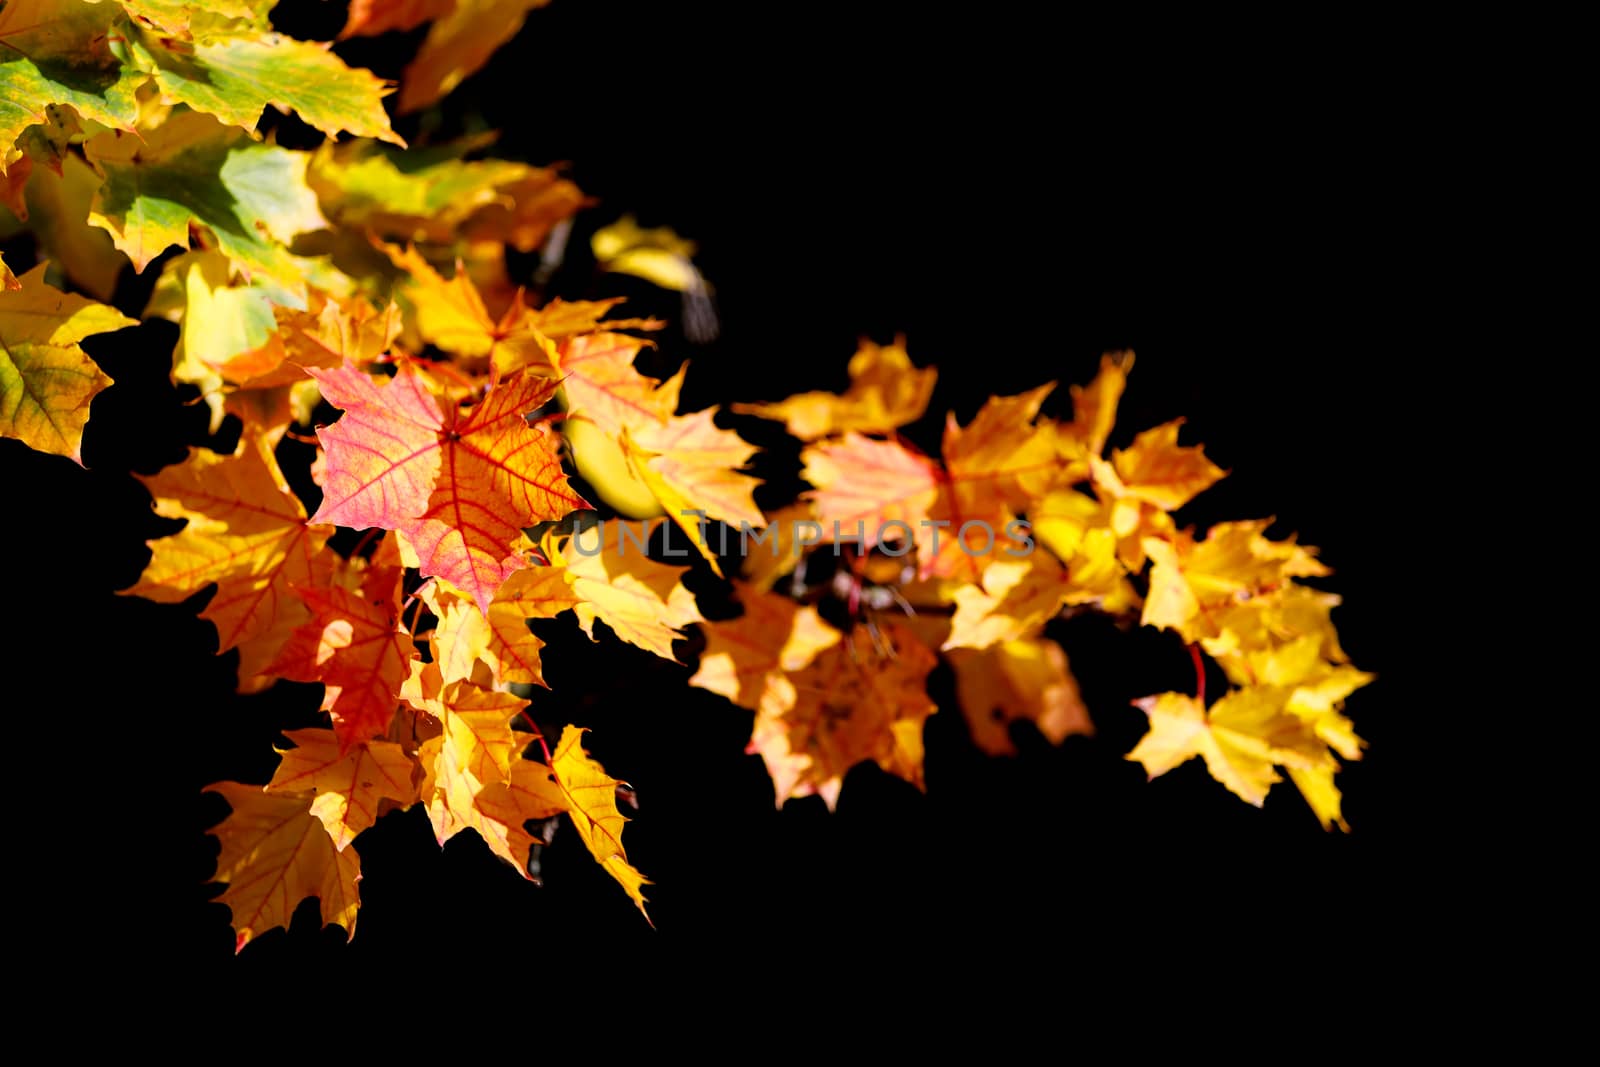 Orange and red autumn leaves against black background. Fall season specific.